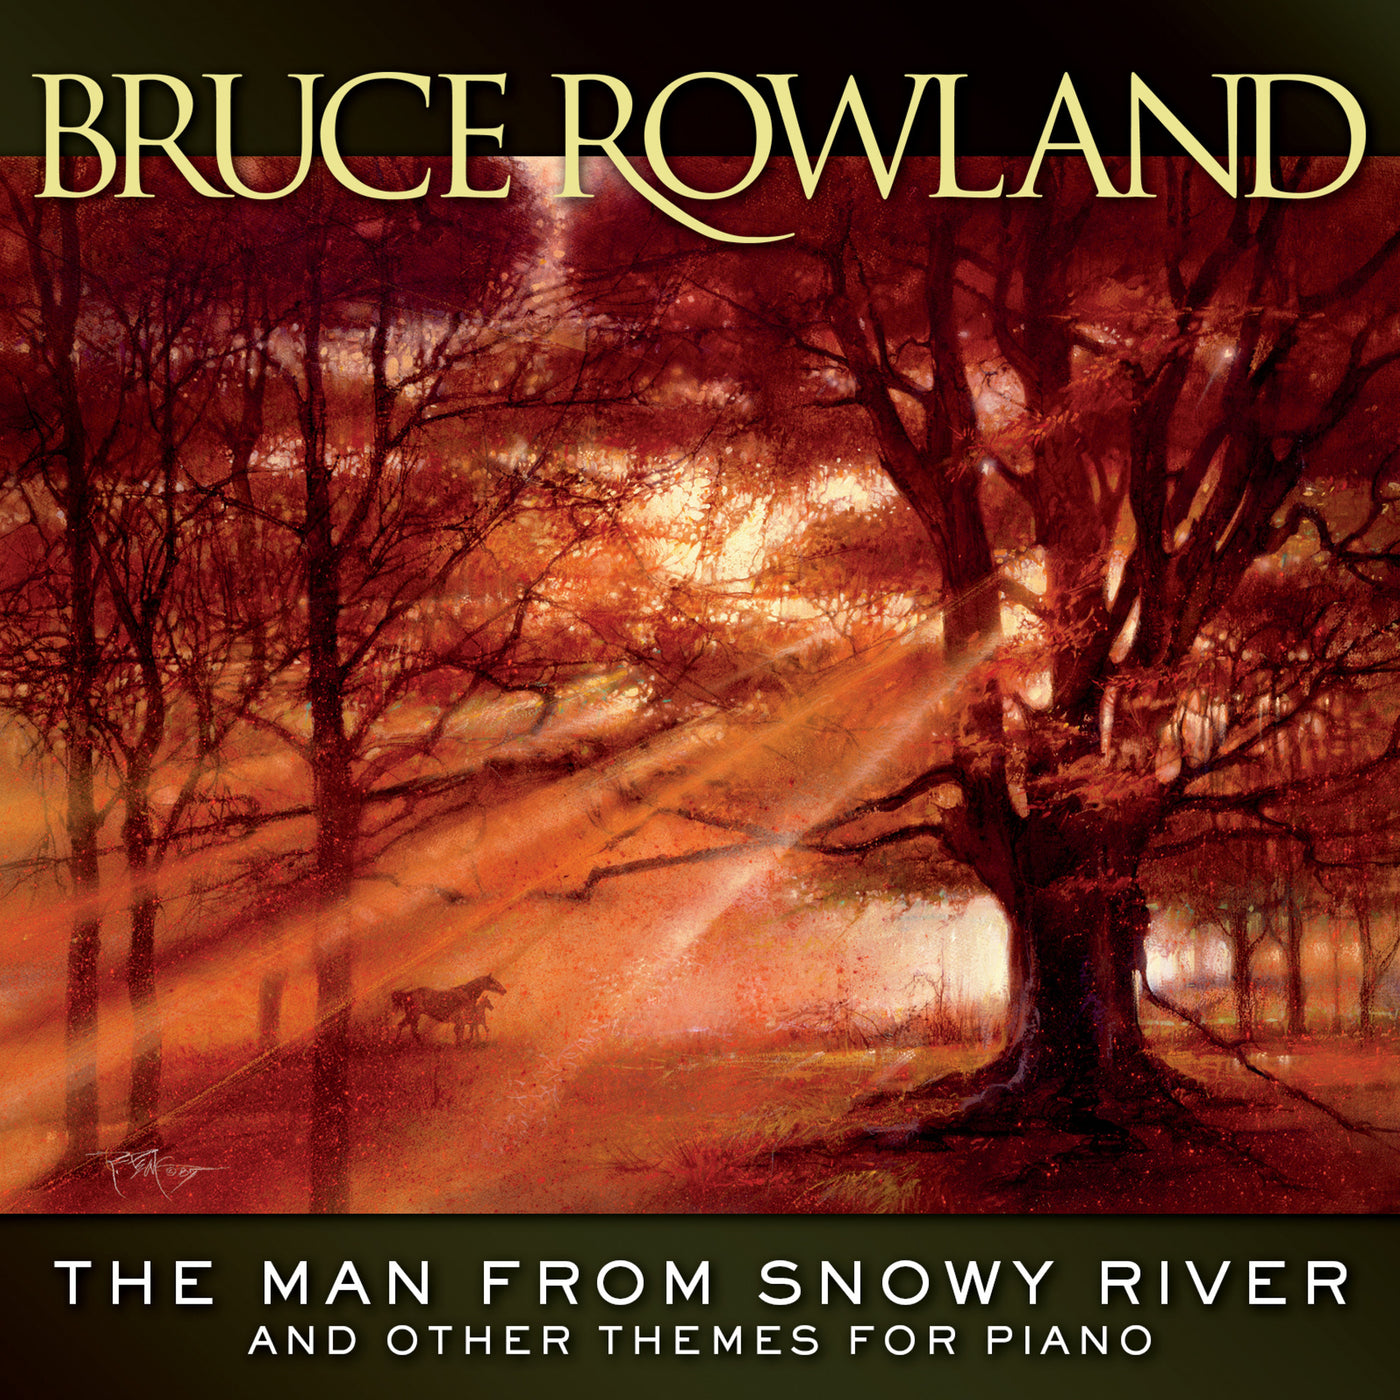 Bruce Rowland: The Man From Snowy River And Other Themes For Piano (CD)